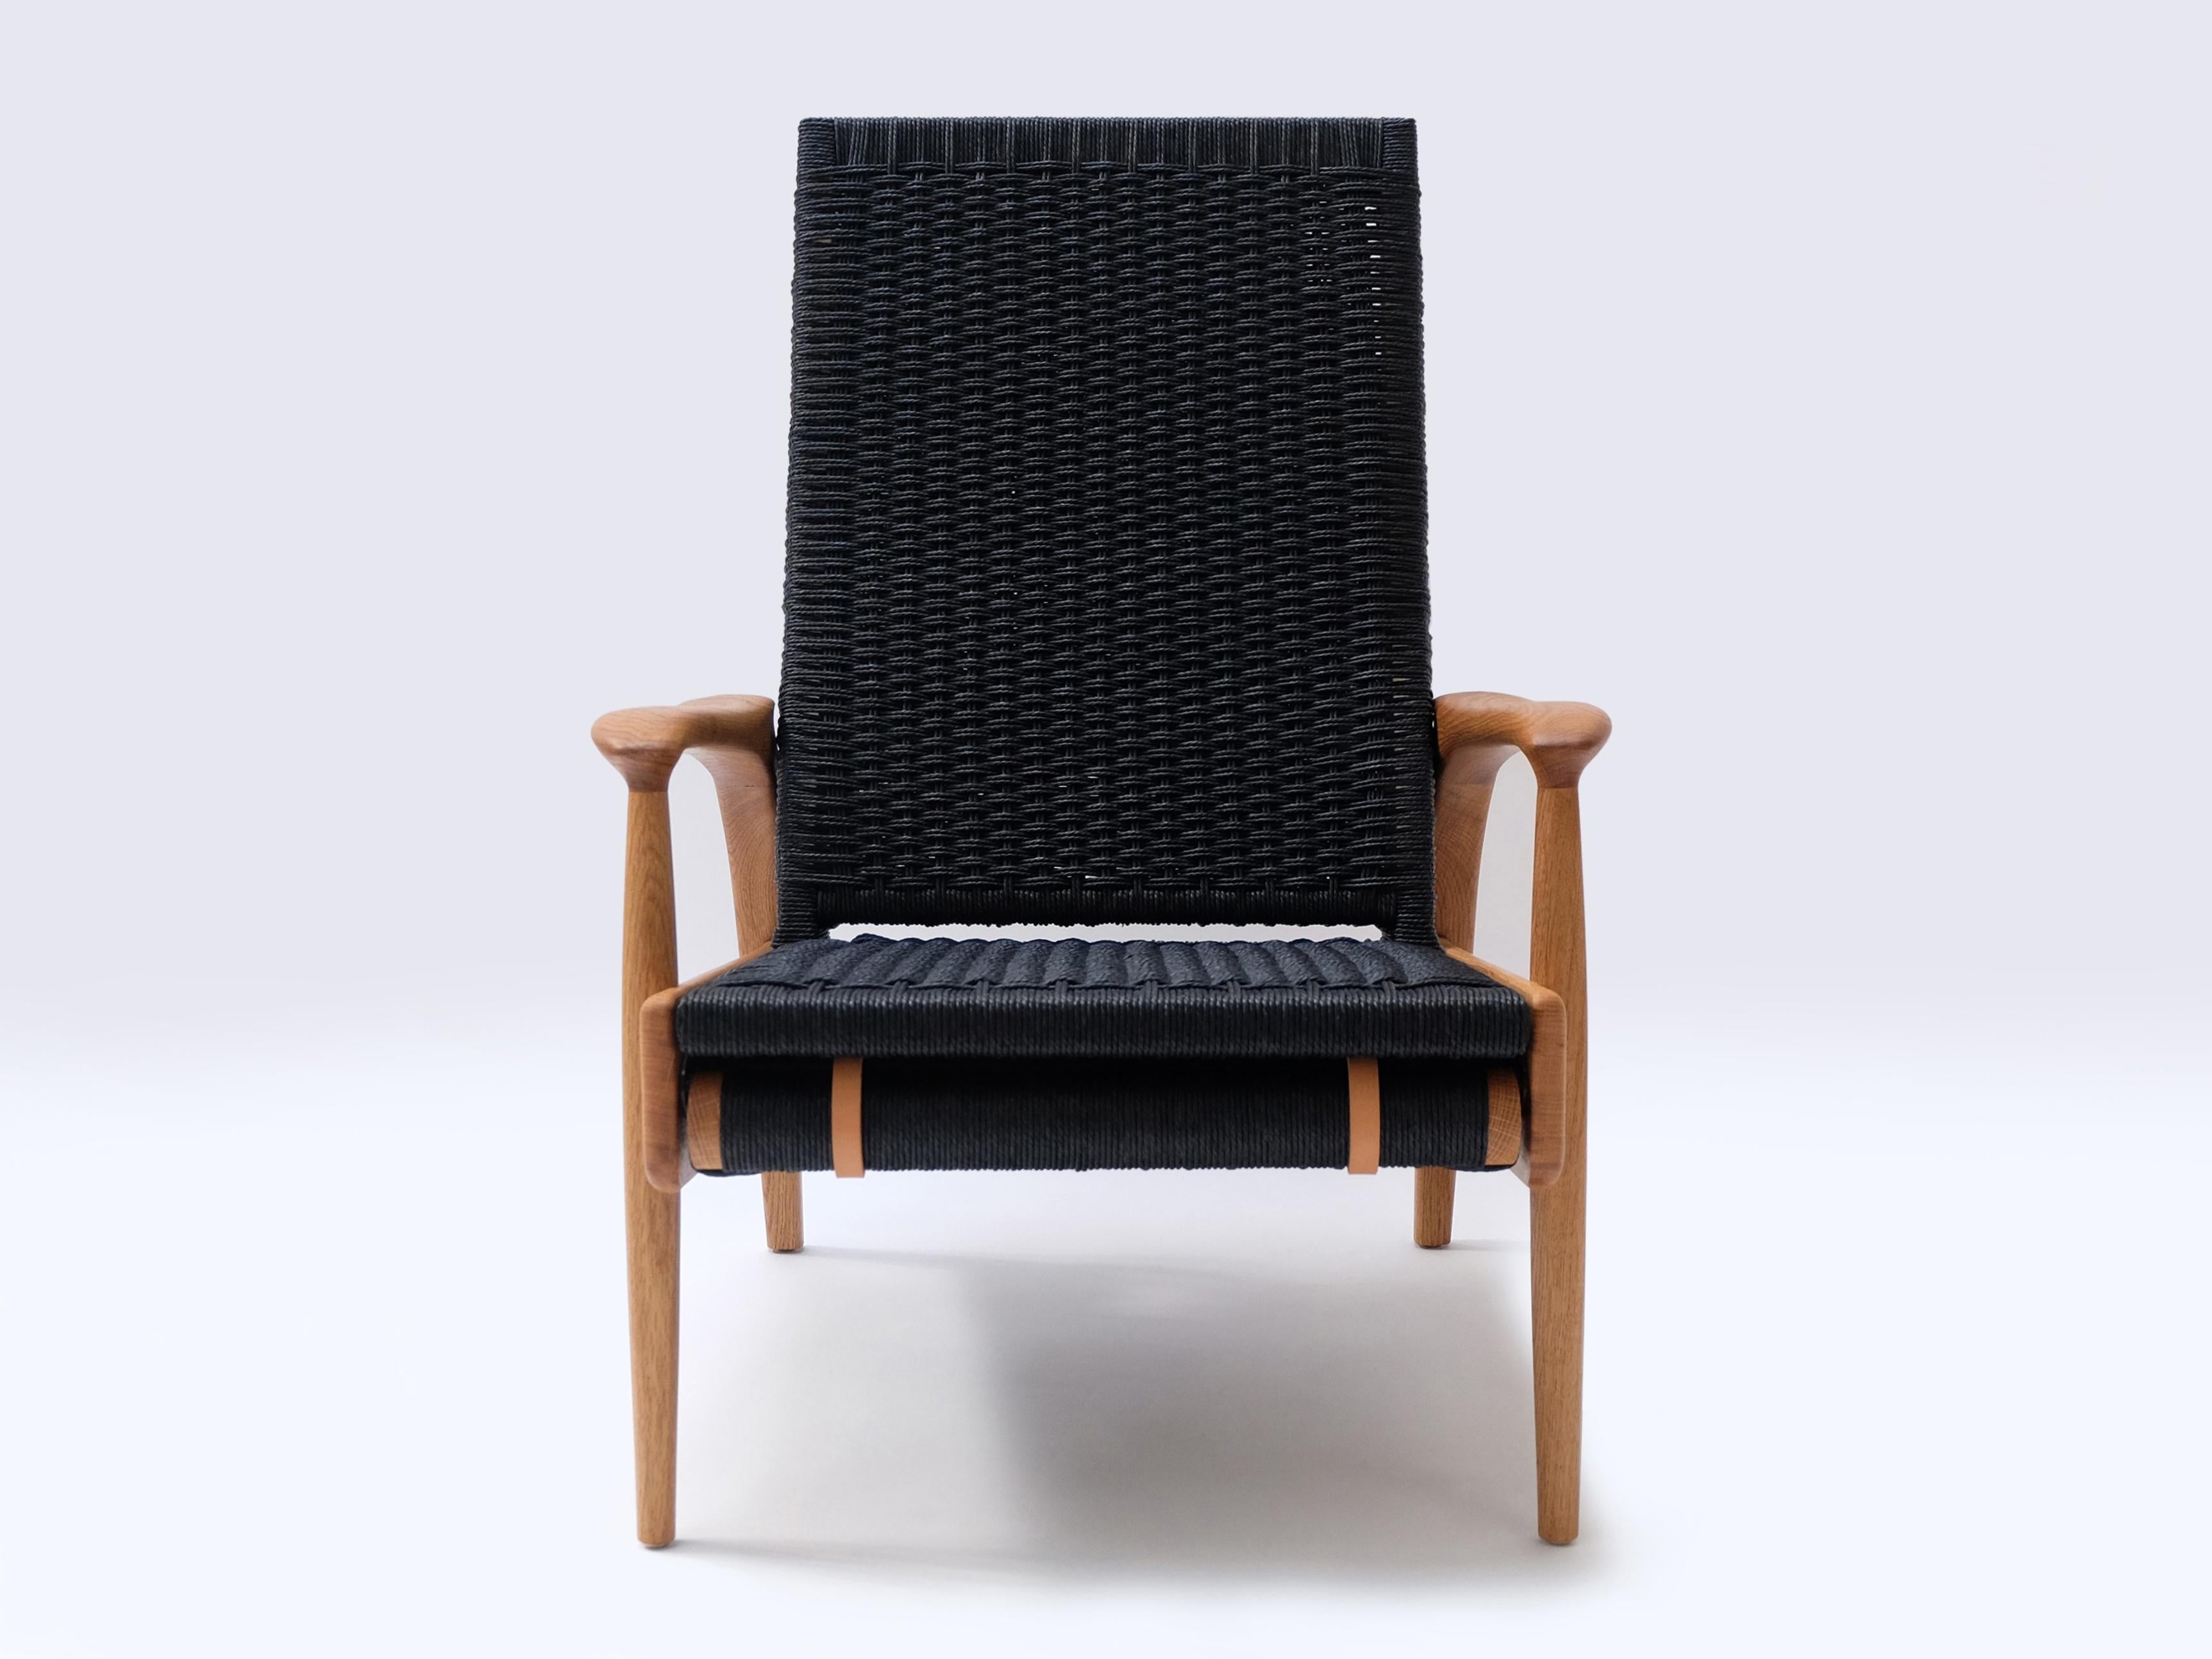 Pair of Custom-Made Handcrafted Reclining Eco Lounge Chairs FENDRIK by Studio180degree
Shown in Sustainable Solid Natural Oiled Oak and Contrasting Original Black Danish Cord

Noble - Tactile – Refined - Sustainable
Reclining Eco Lounge Chair